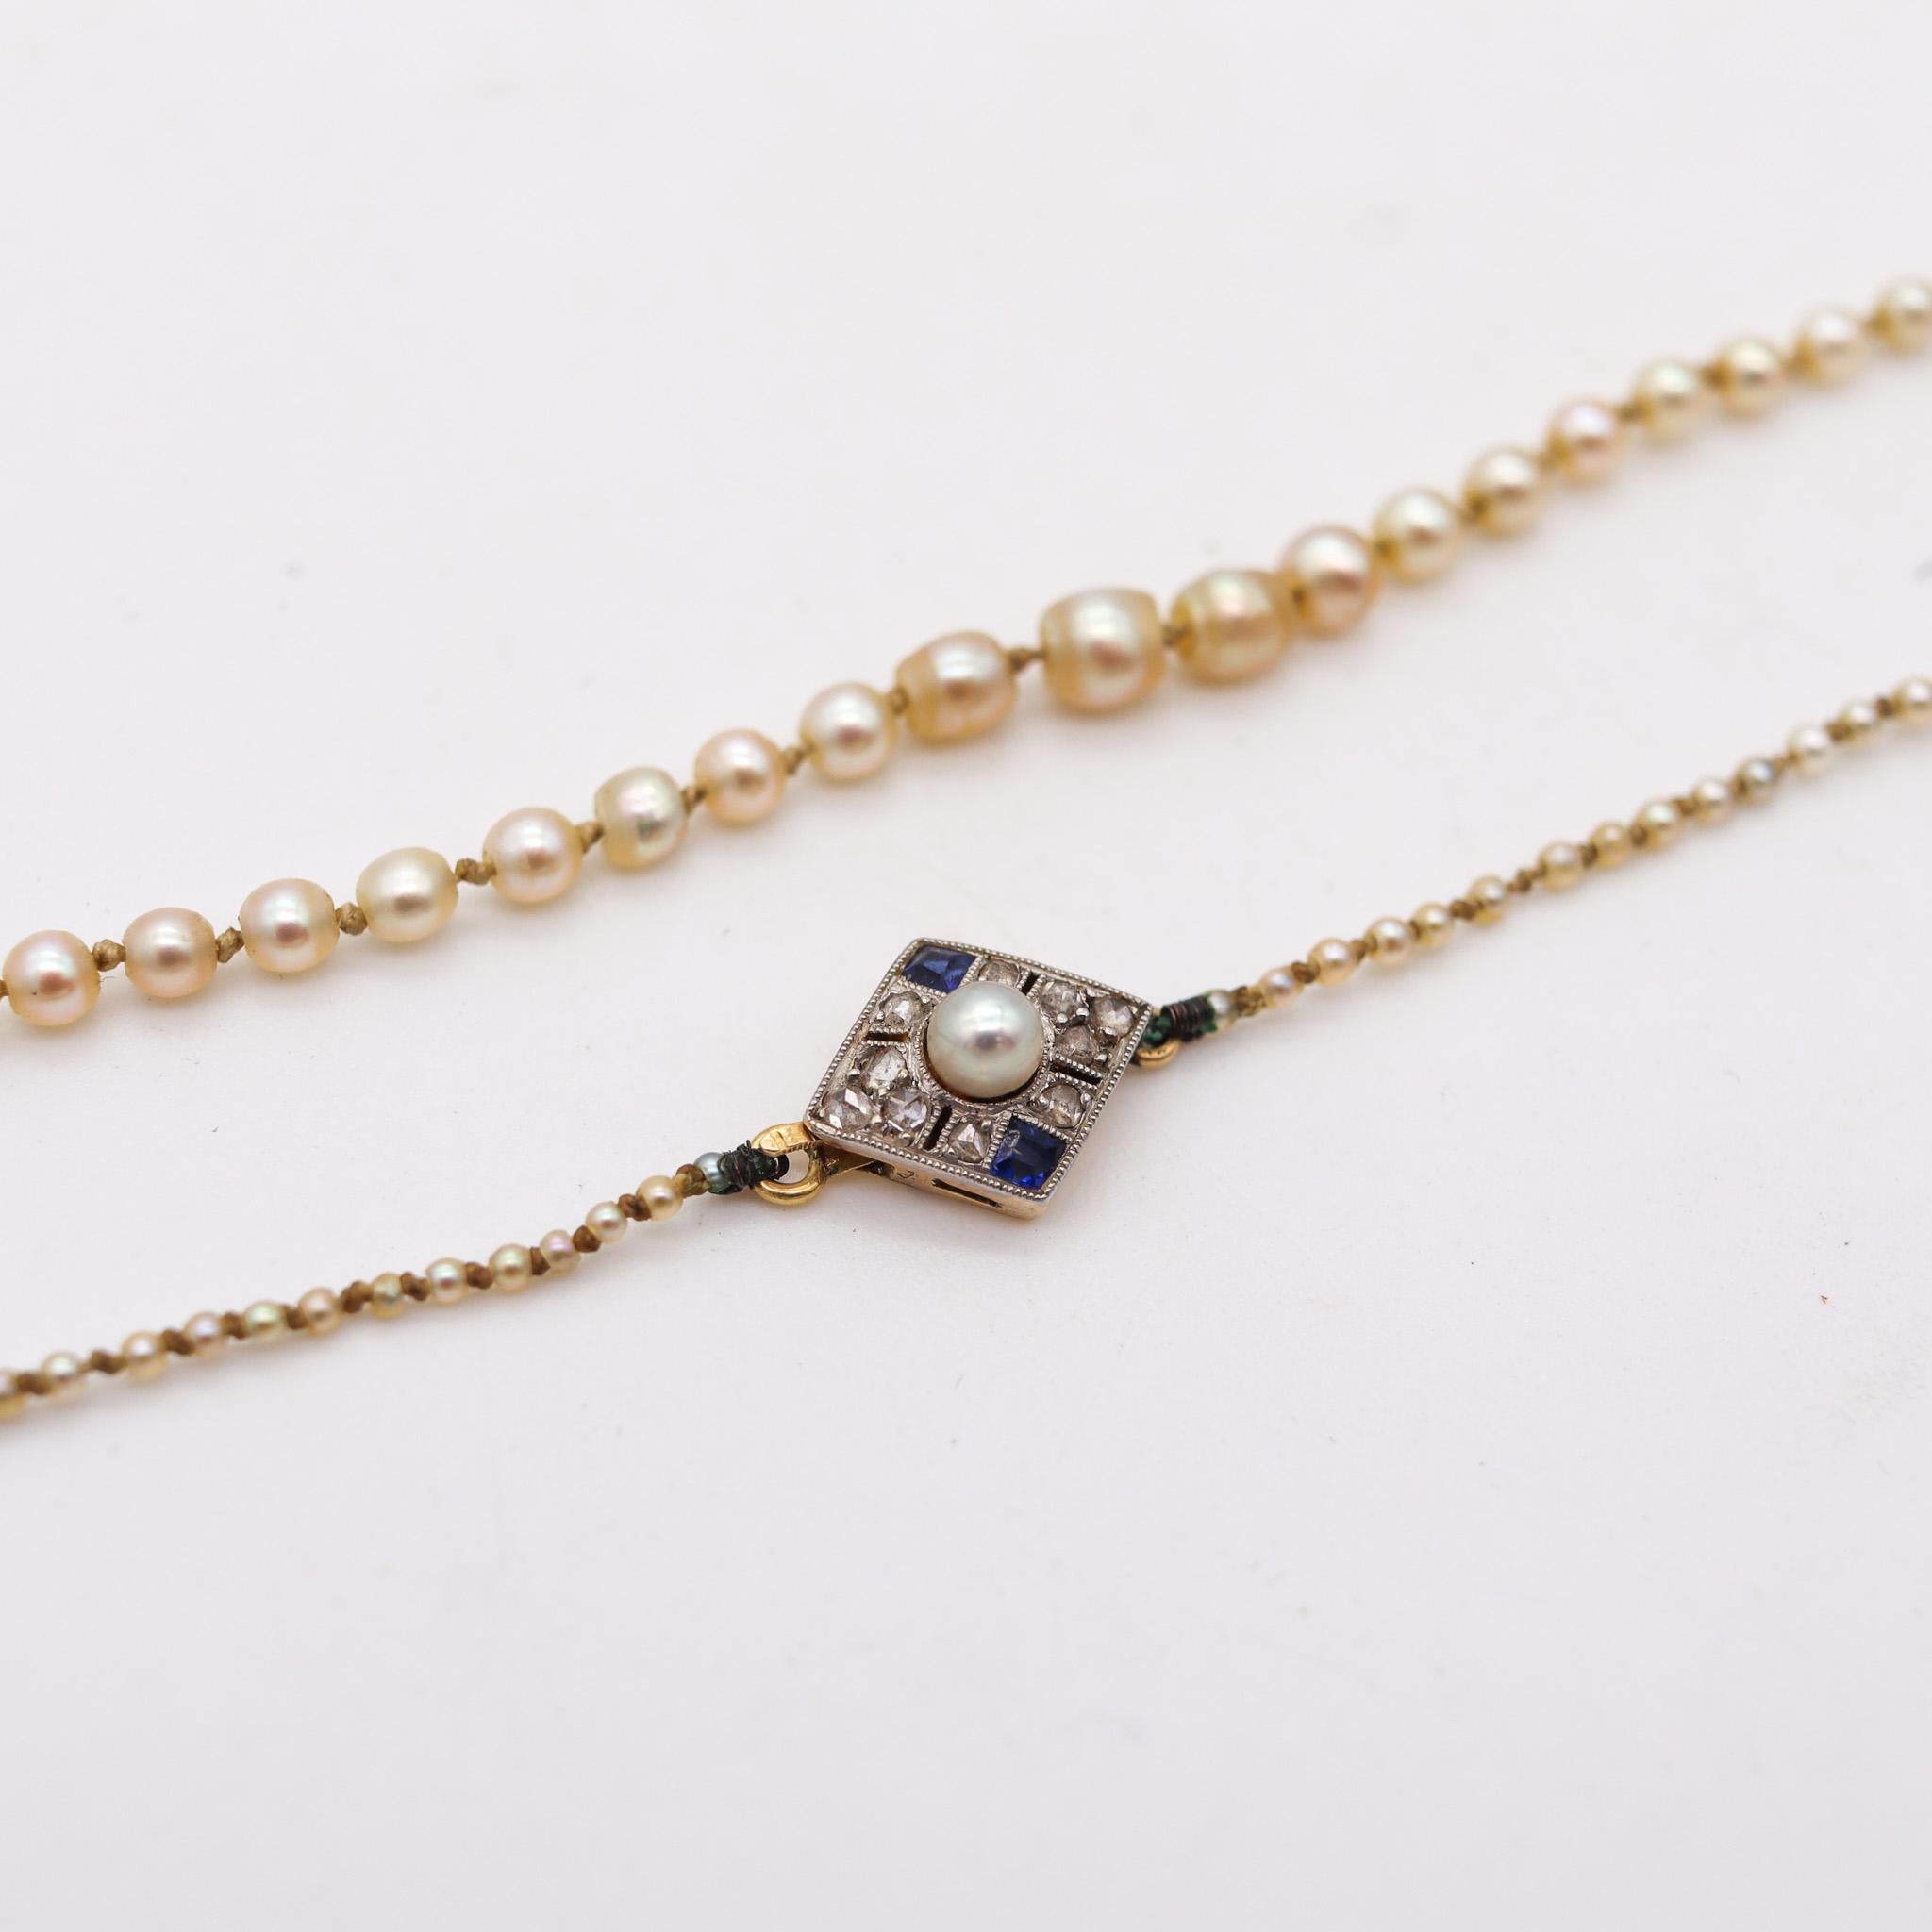 Women's Edwardian 1910 Natural Pearls Necklace In 18Kt Gold With Diamonds And Sapphires For Sale